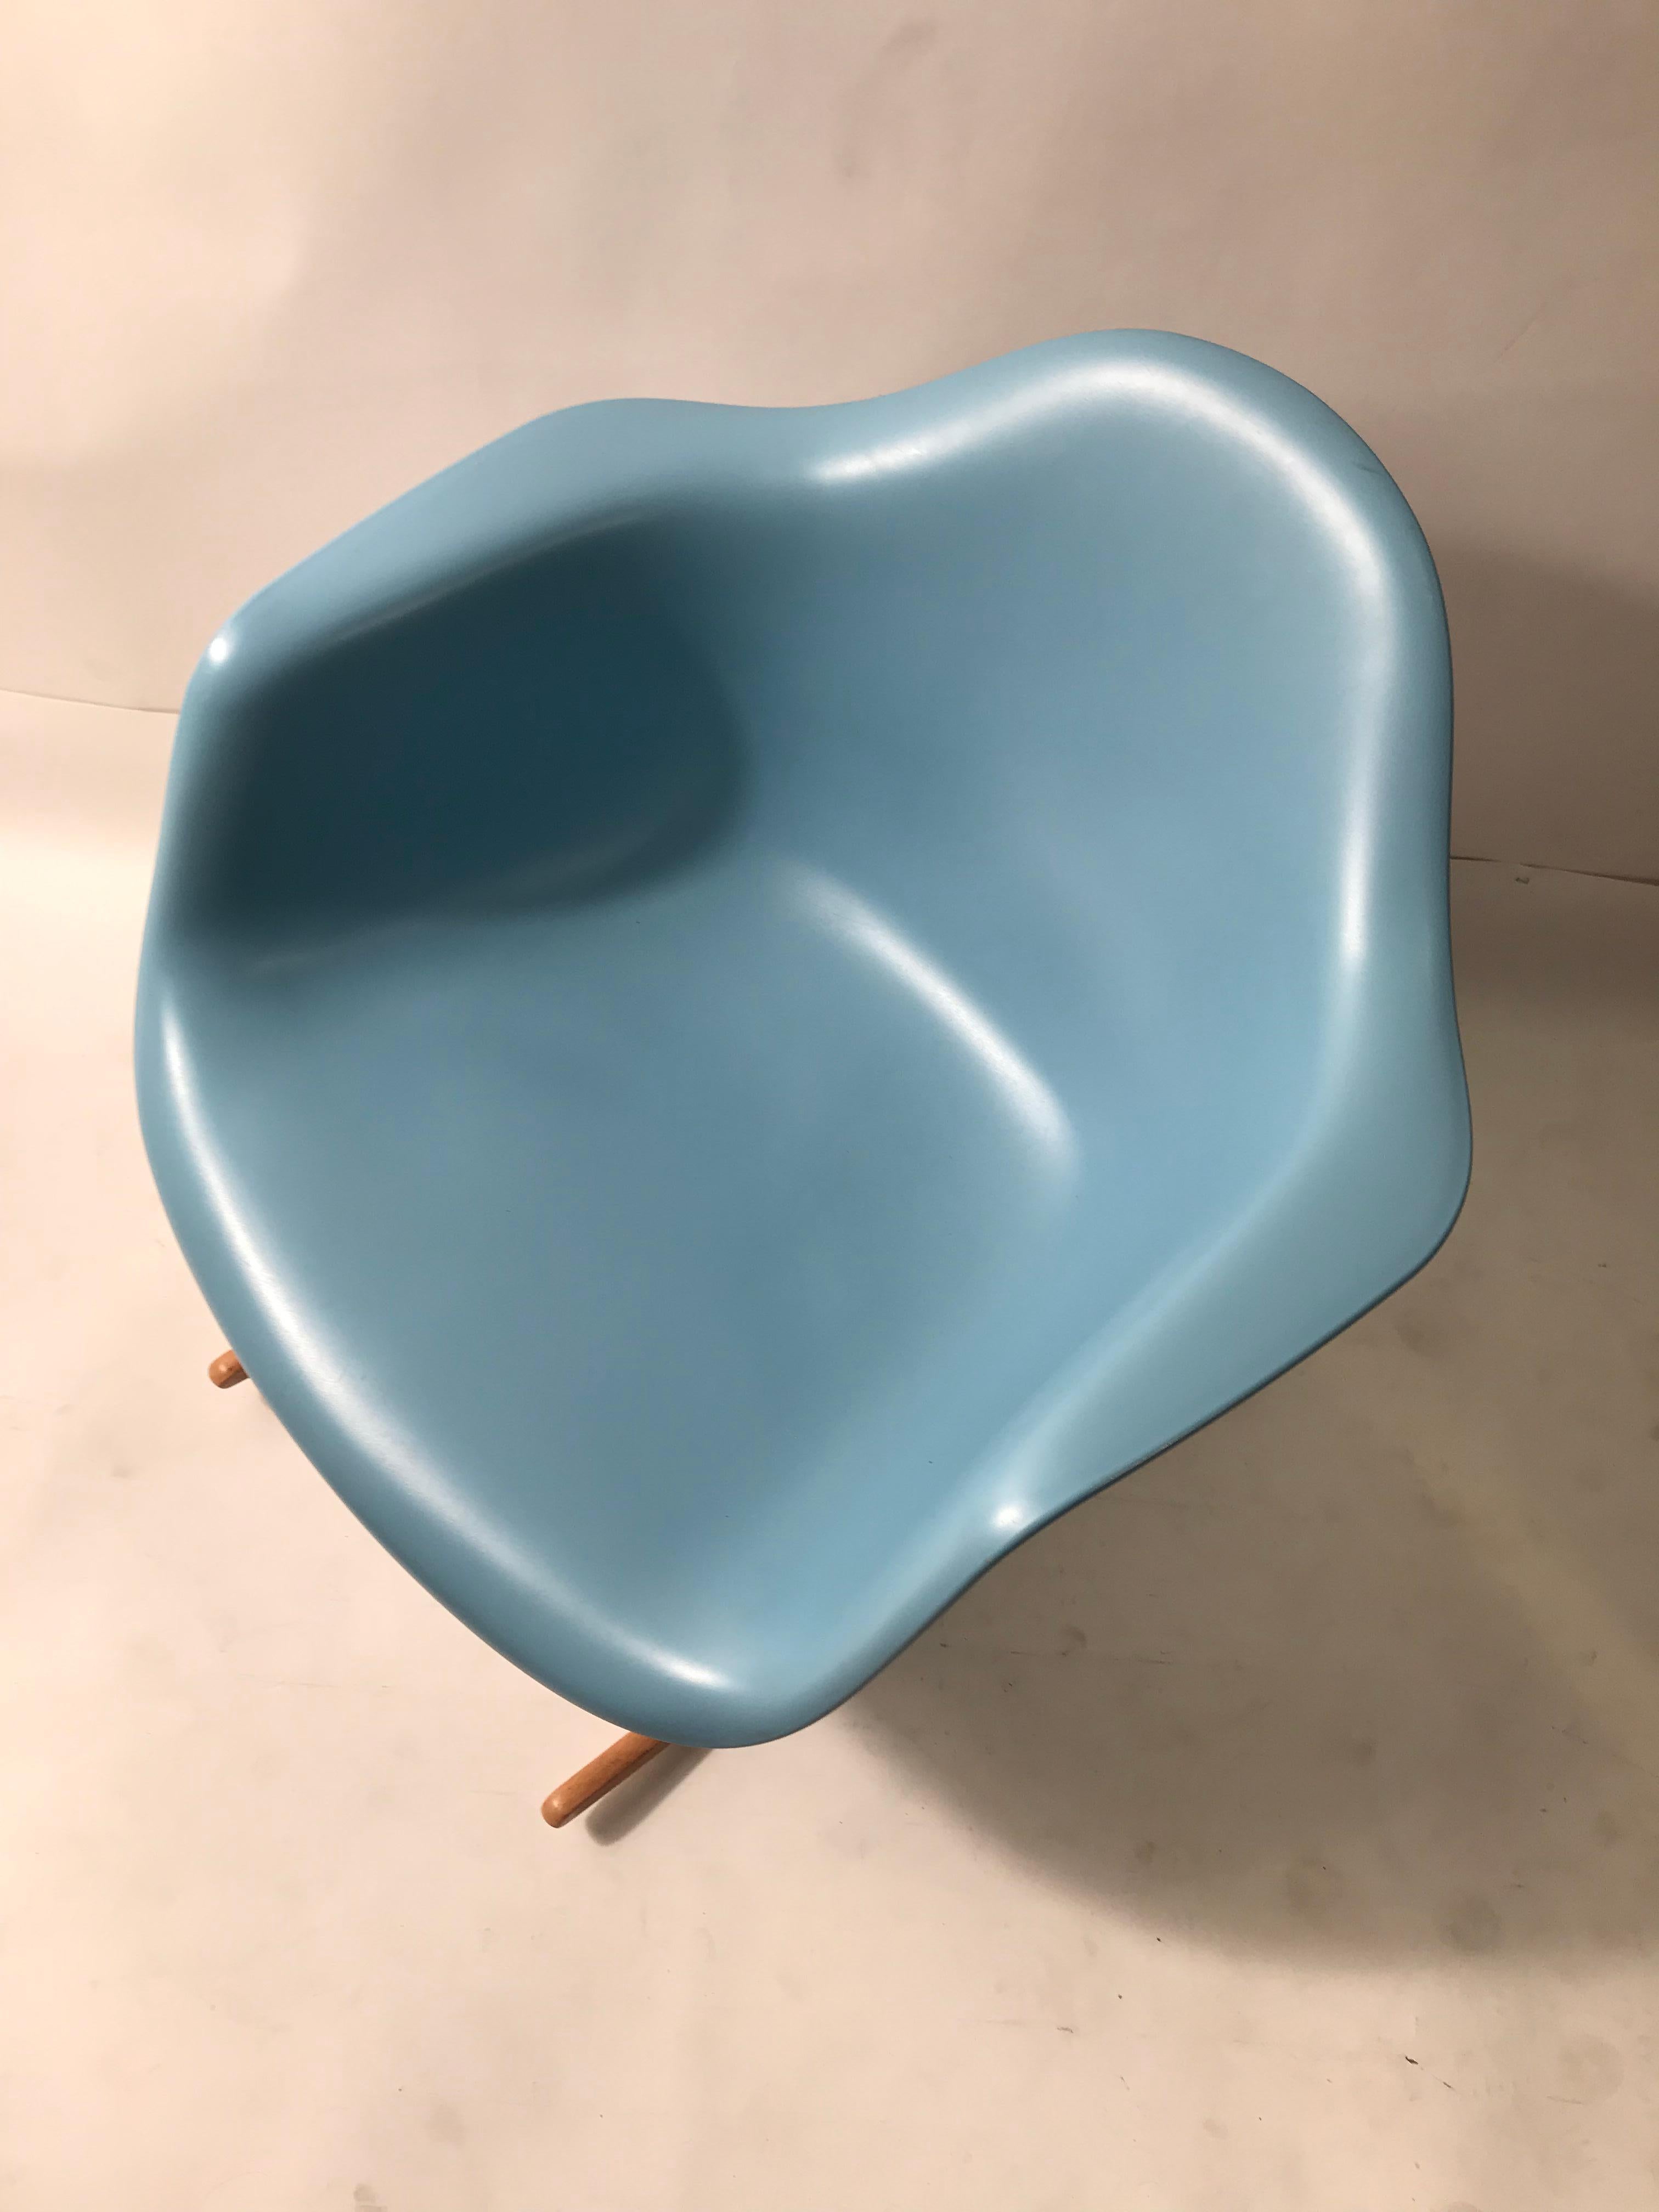 Classic Eames Rar produced in plastic by Vitra. Color no longer in production.